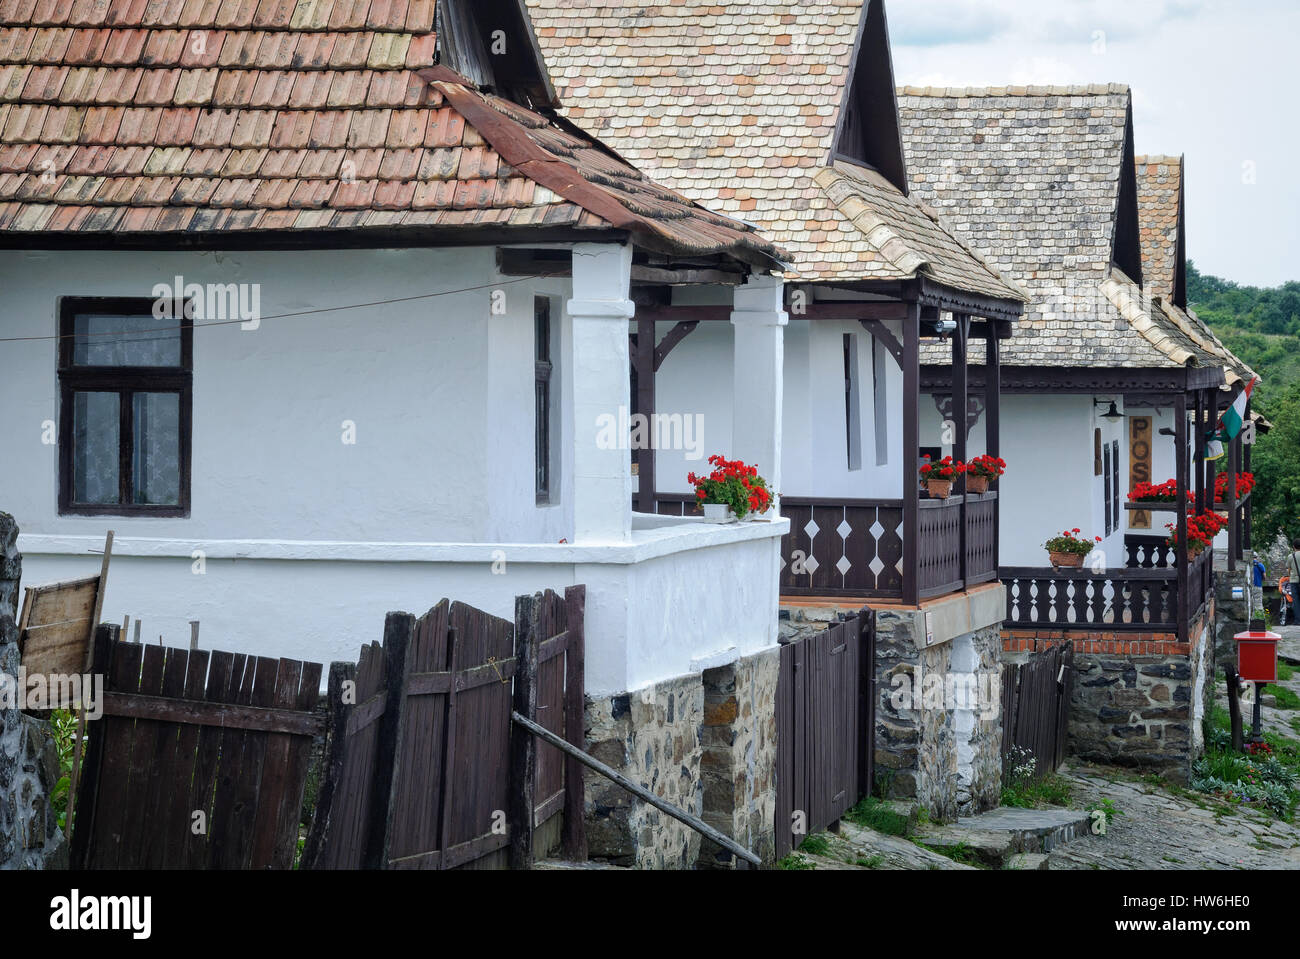 Row of farmhouses with porches decorated with flowers in Holloko, Hungary Stock Photo